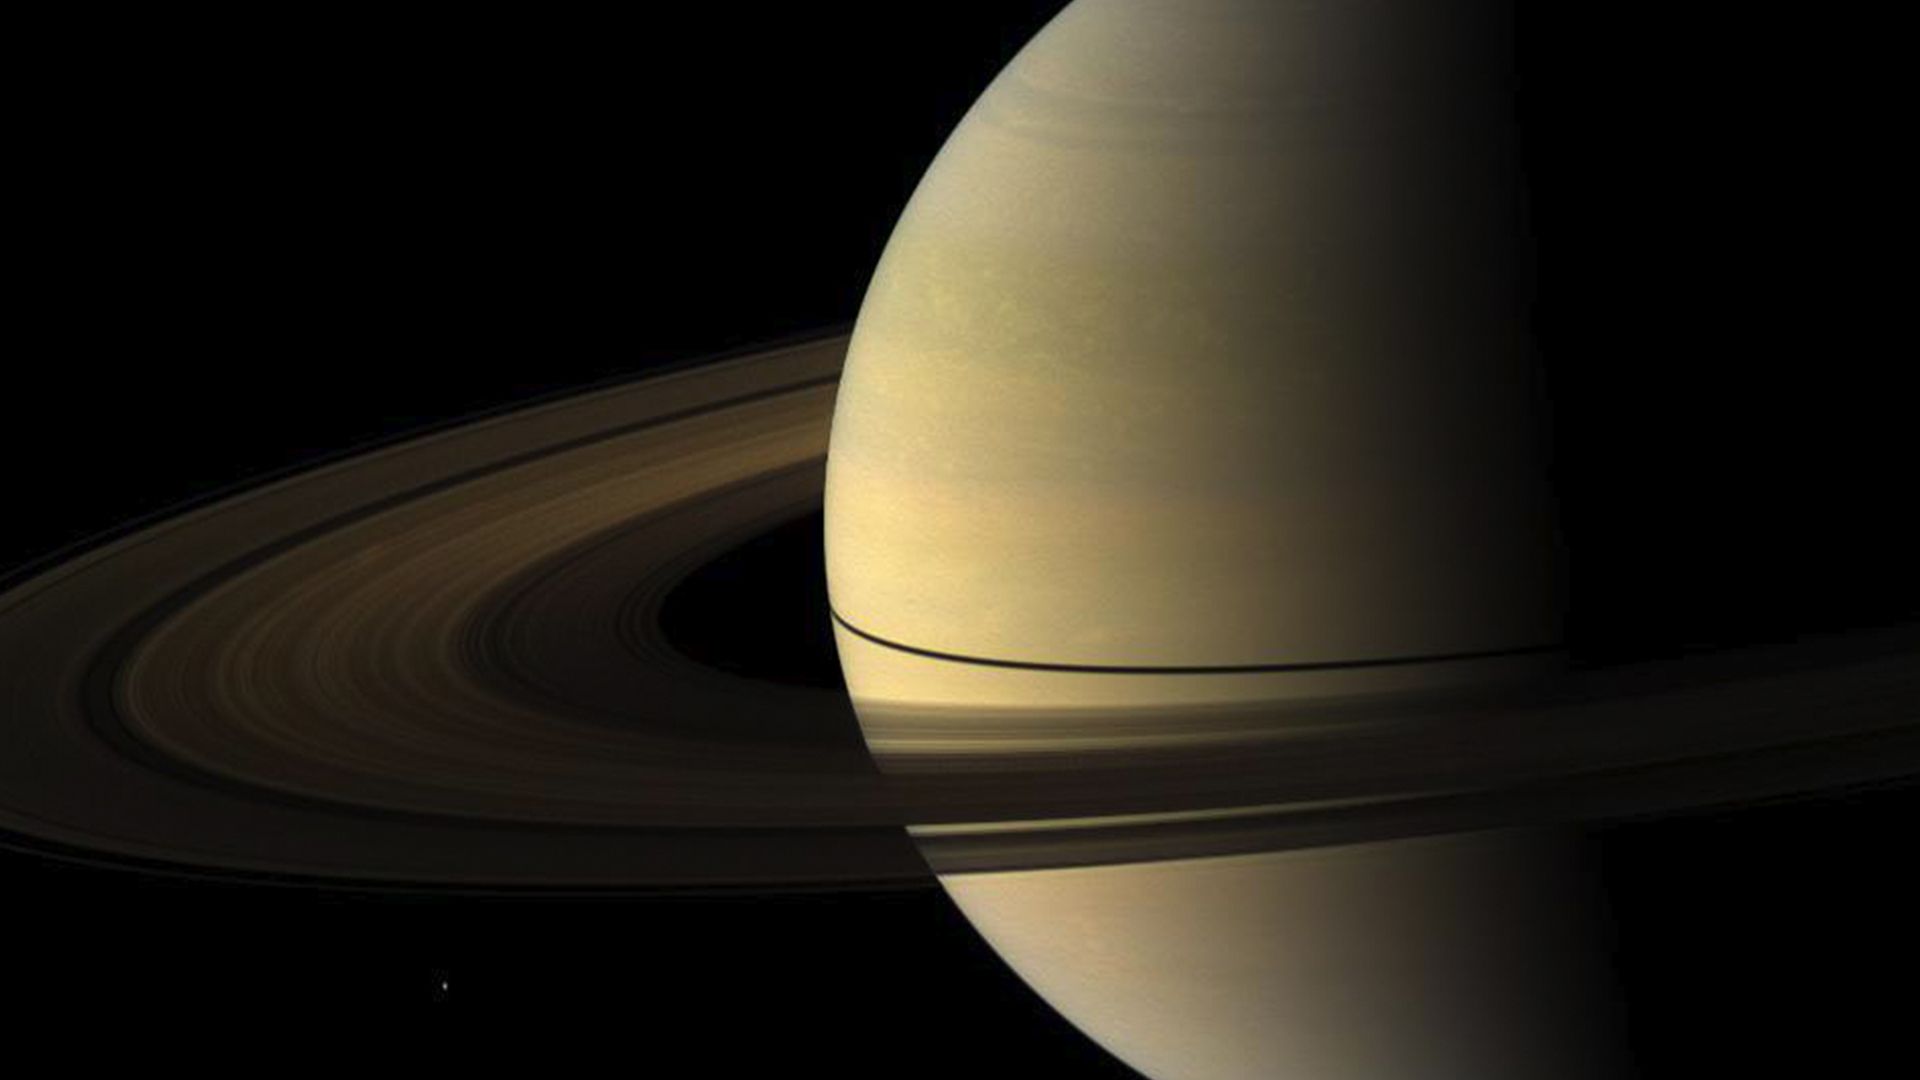 A 2009 image from Cassini of Saturn's rings casting a narrow shadow on the planet. 